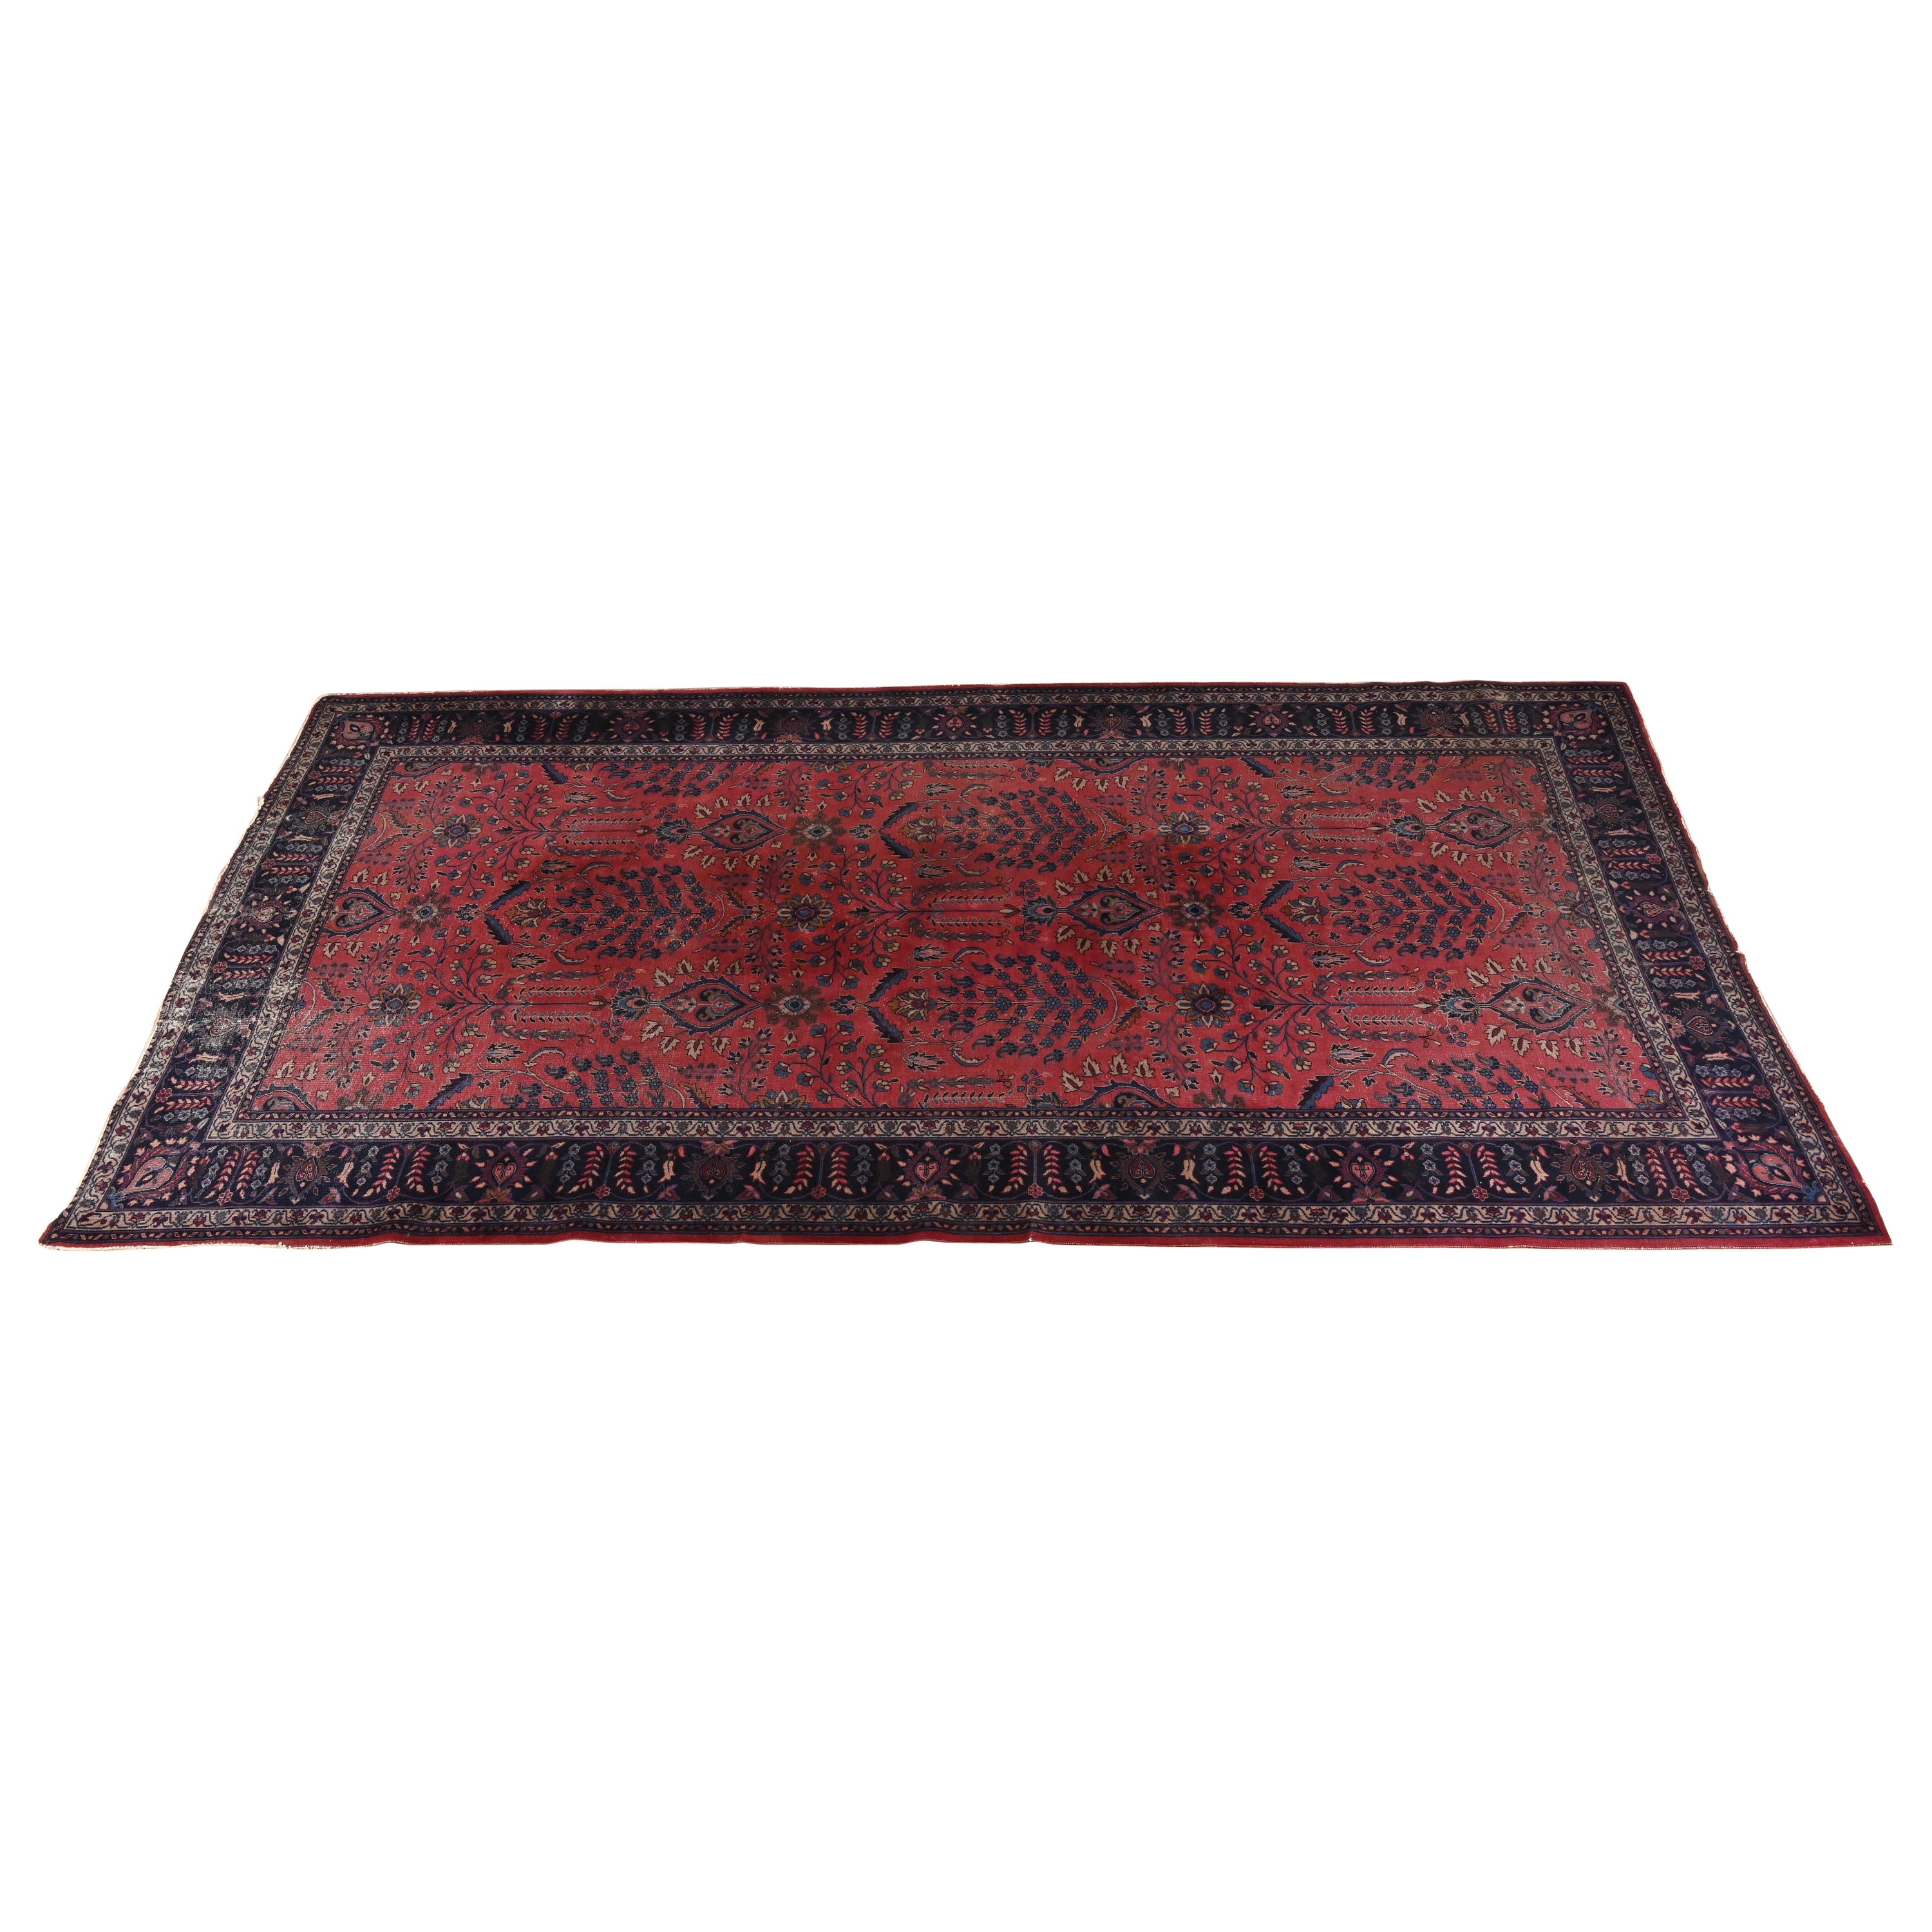 Vintage Hand-Knotted Persian Sarouk Palace Size Rug, Circa 1940s For Sale